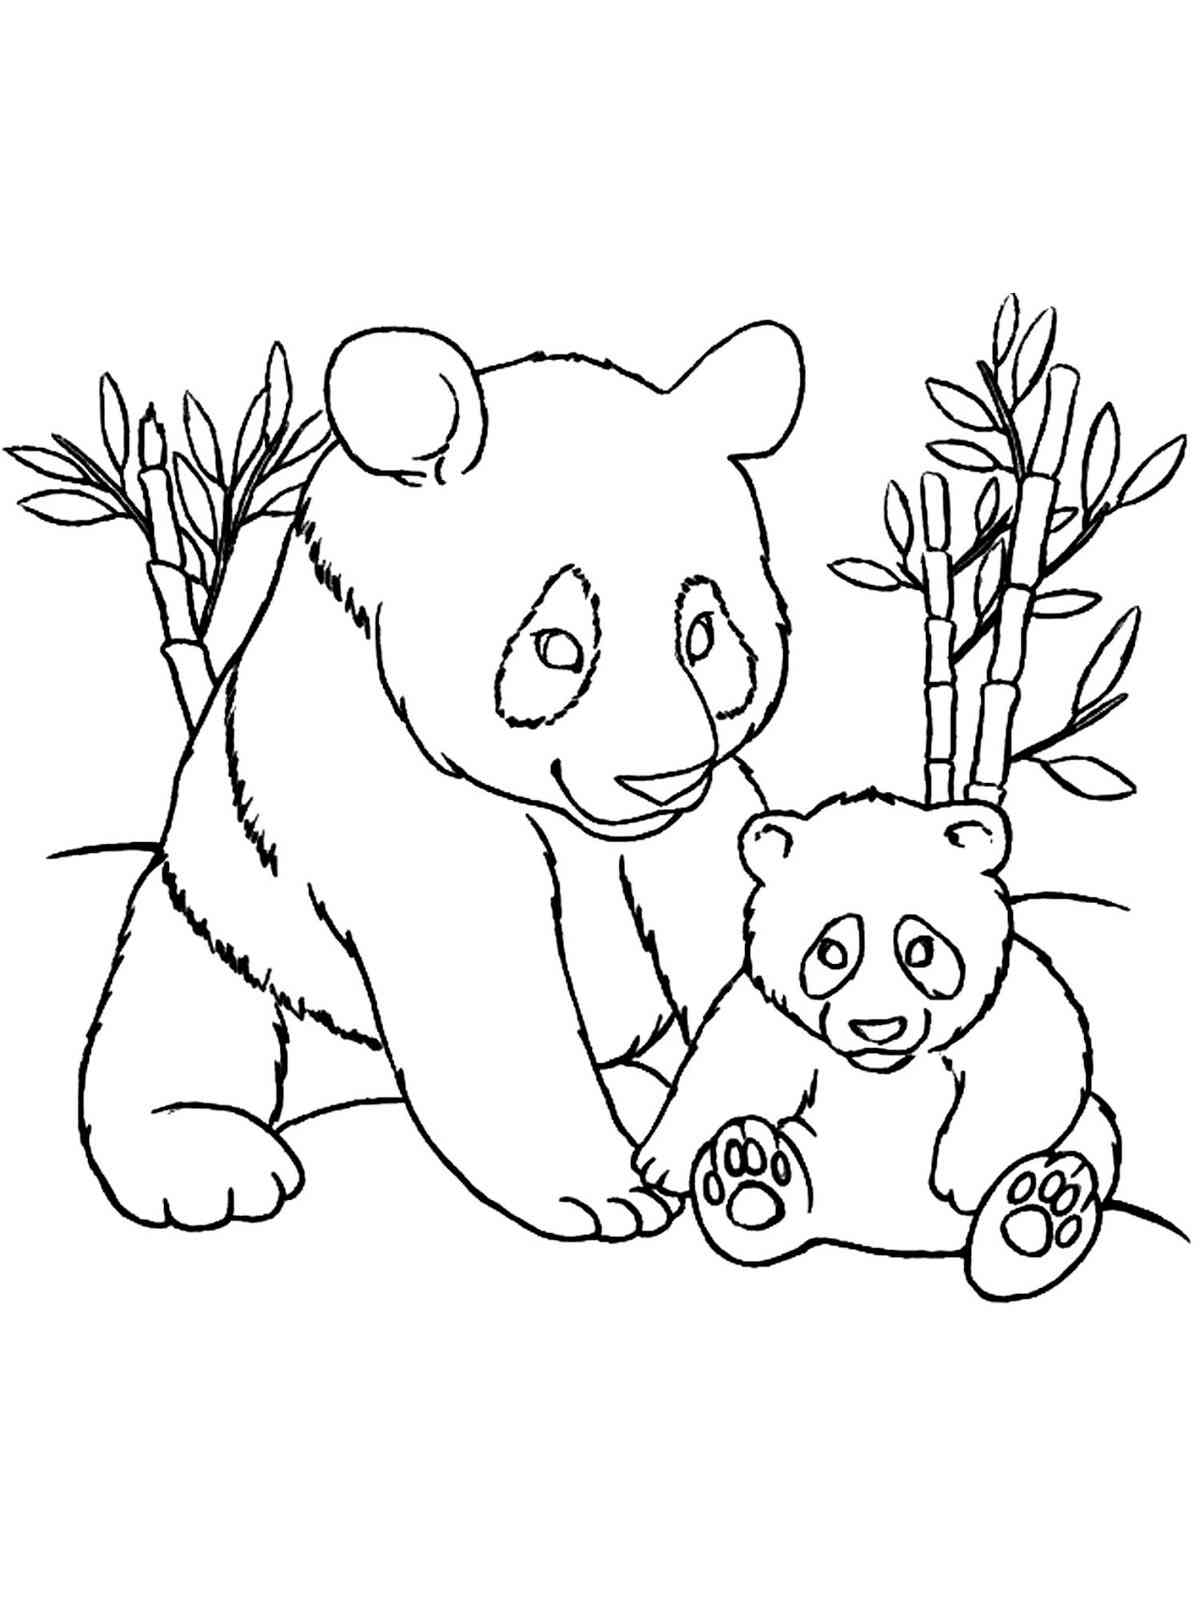 Panda with a cub coloring page